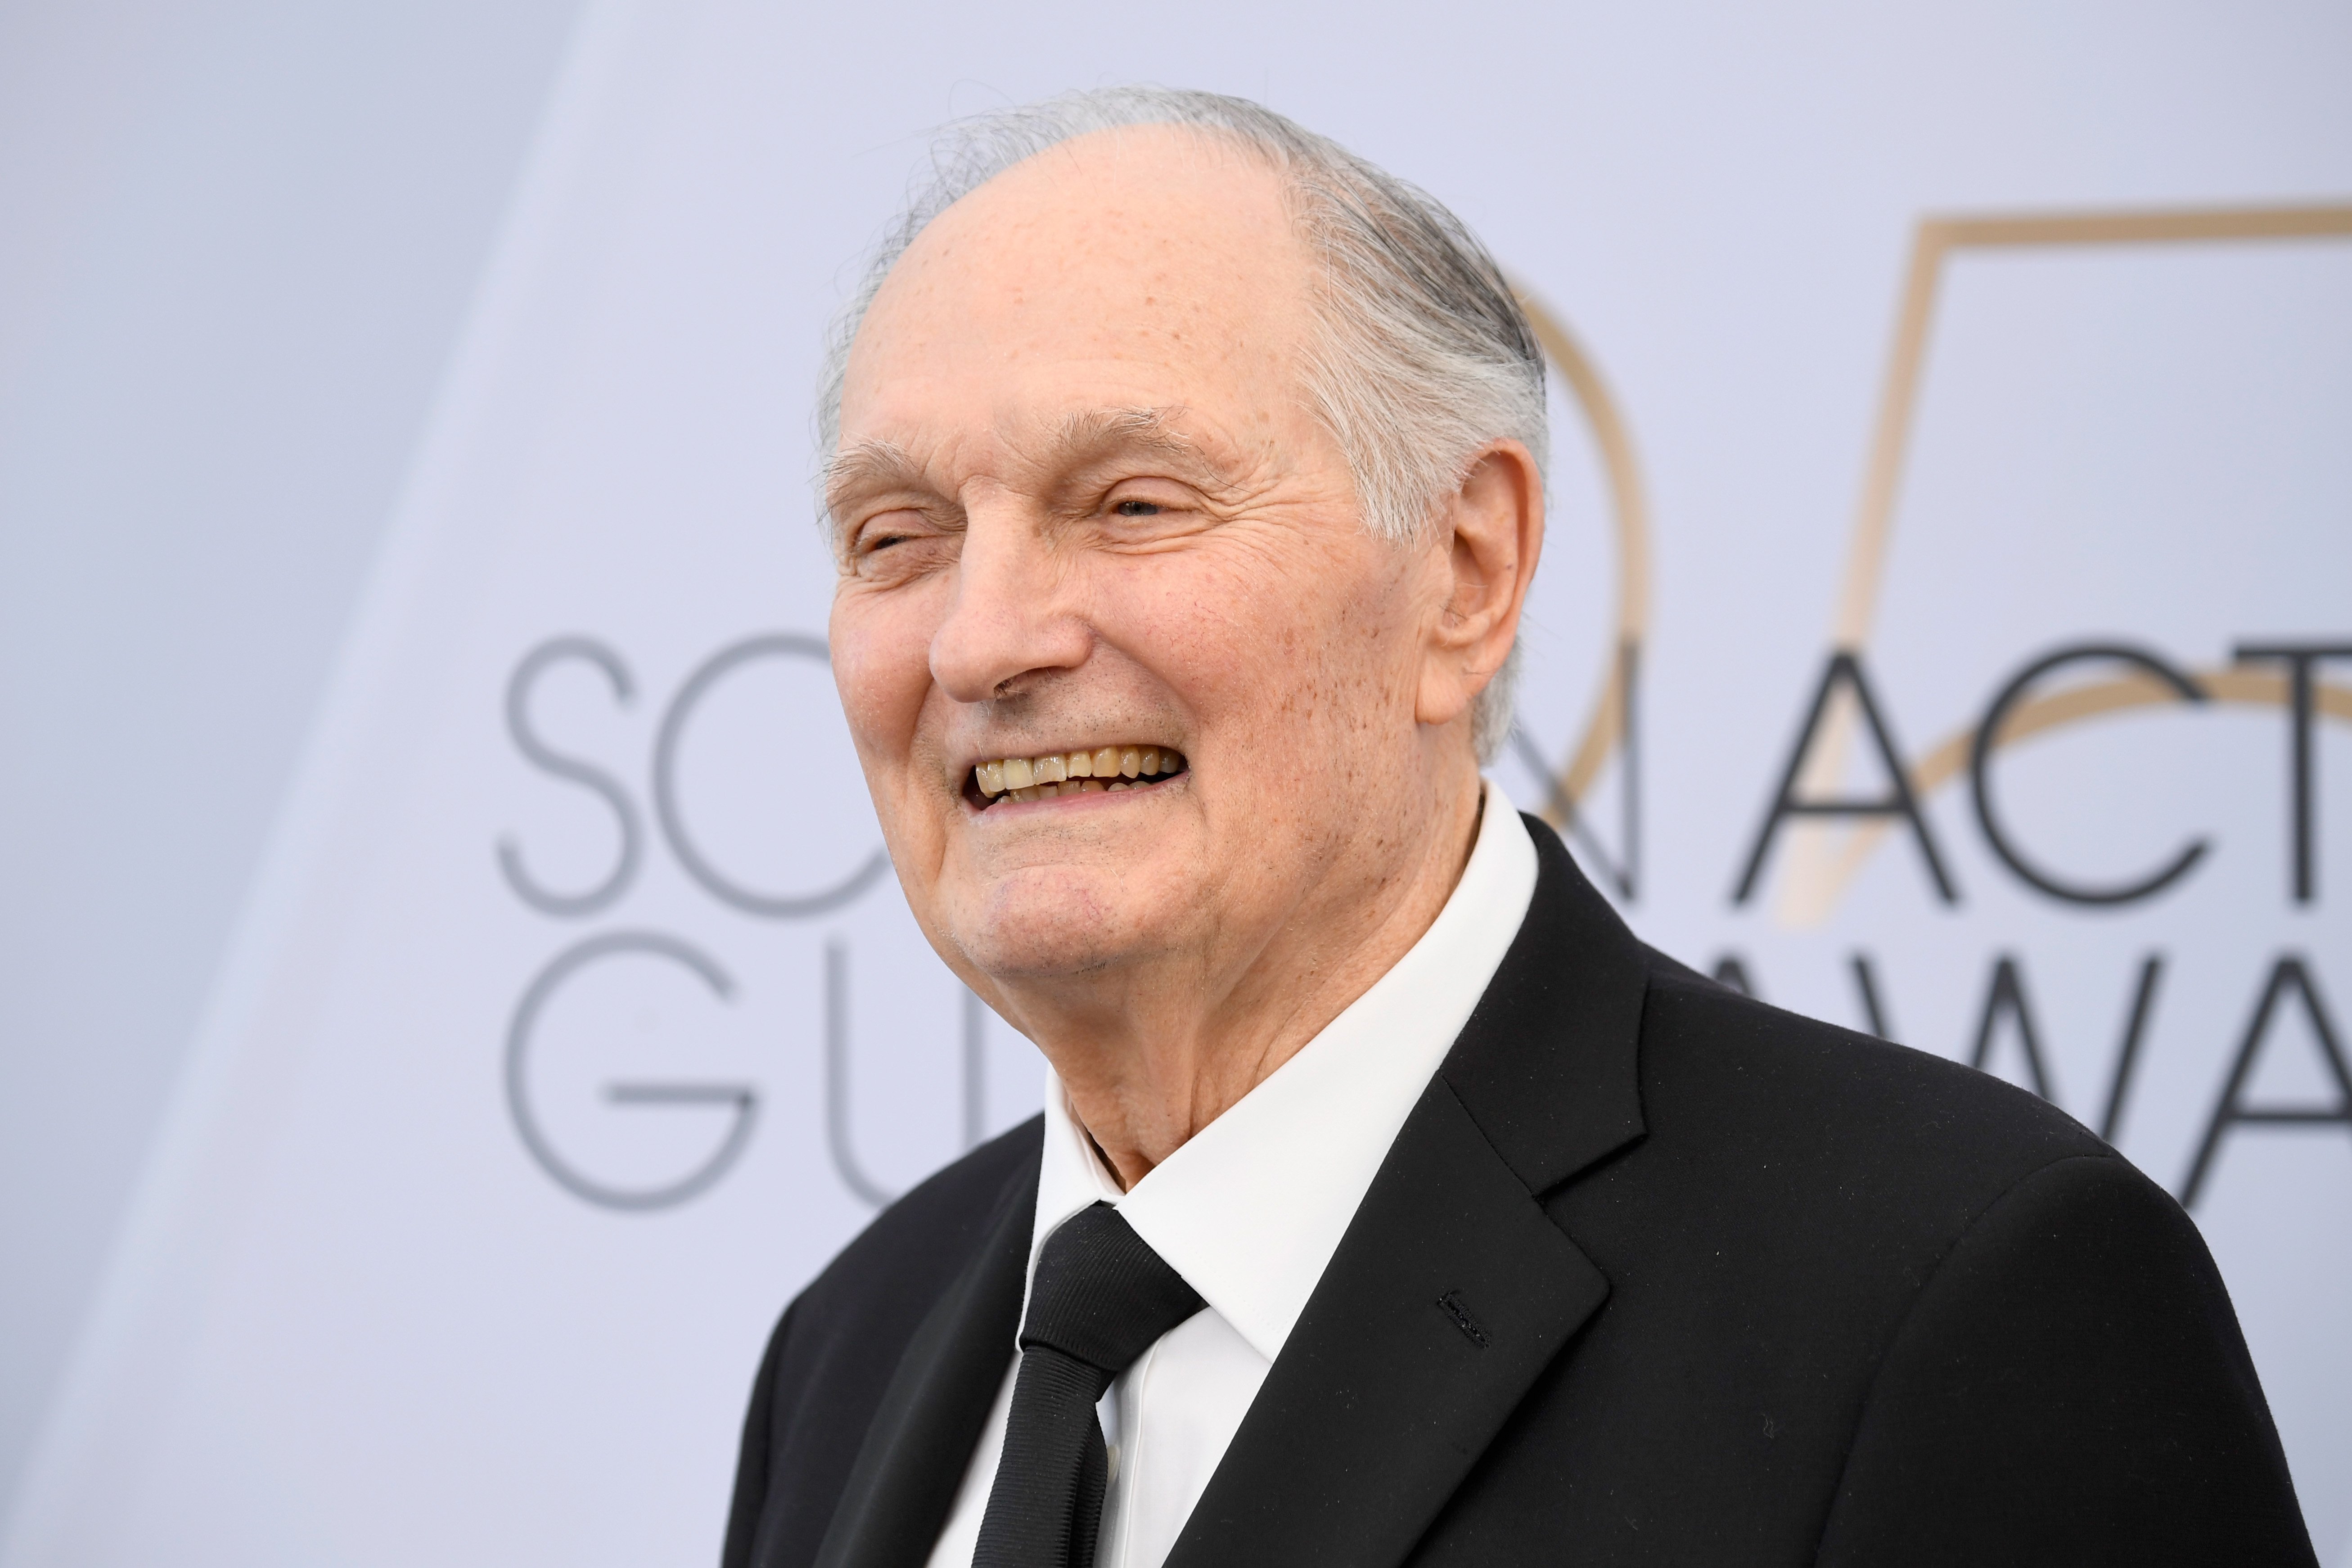 Alan Alda from M*A*S*H Opens up about Spending Time with His Grandkids